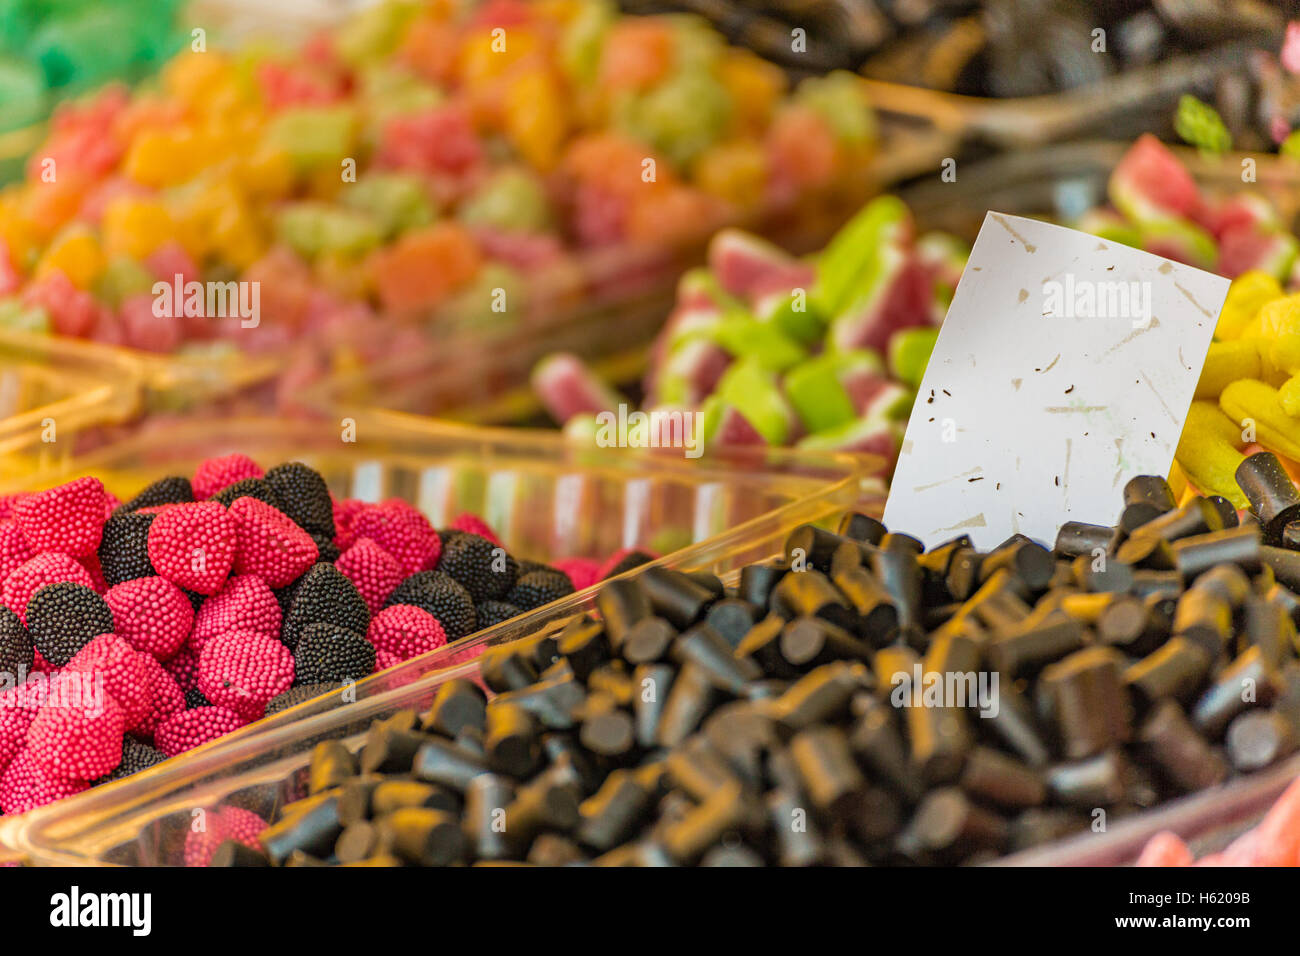 Background of colourful candy jellies in stall market Stock Photo